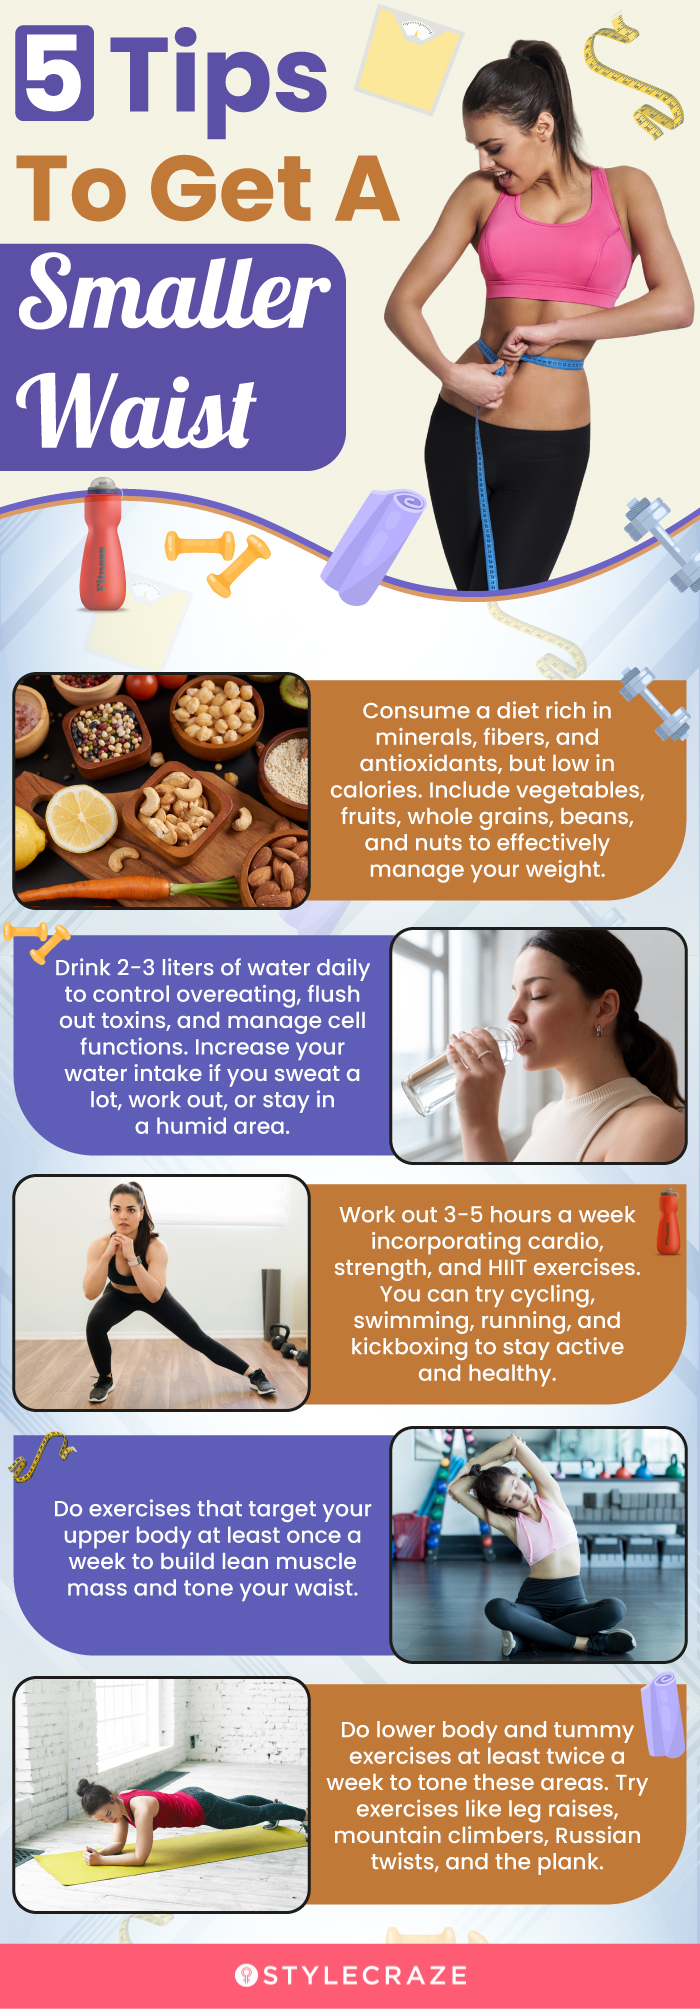 7 tips to get a smaller waist (infographic)